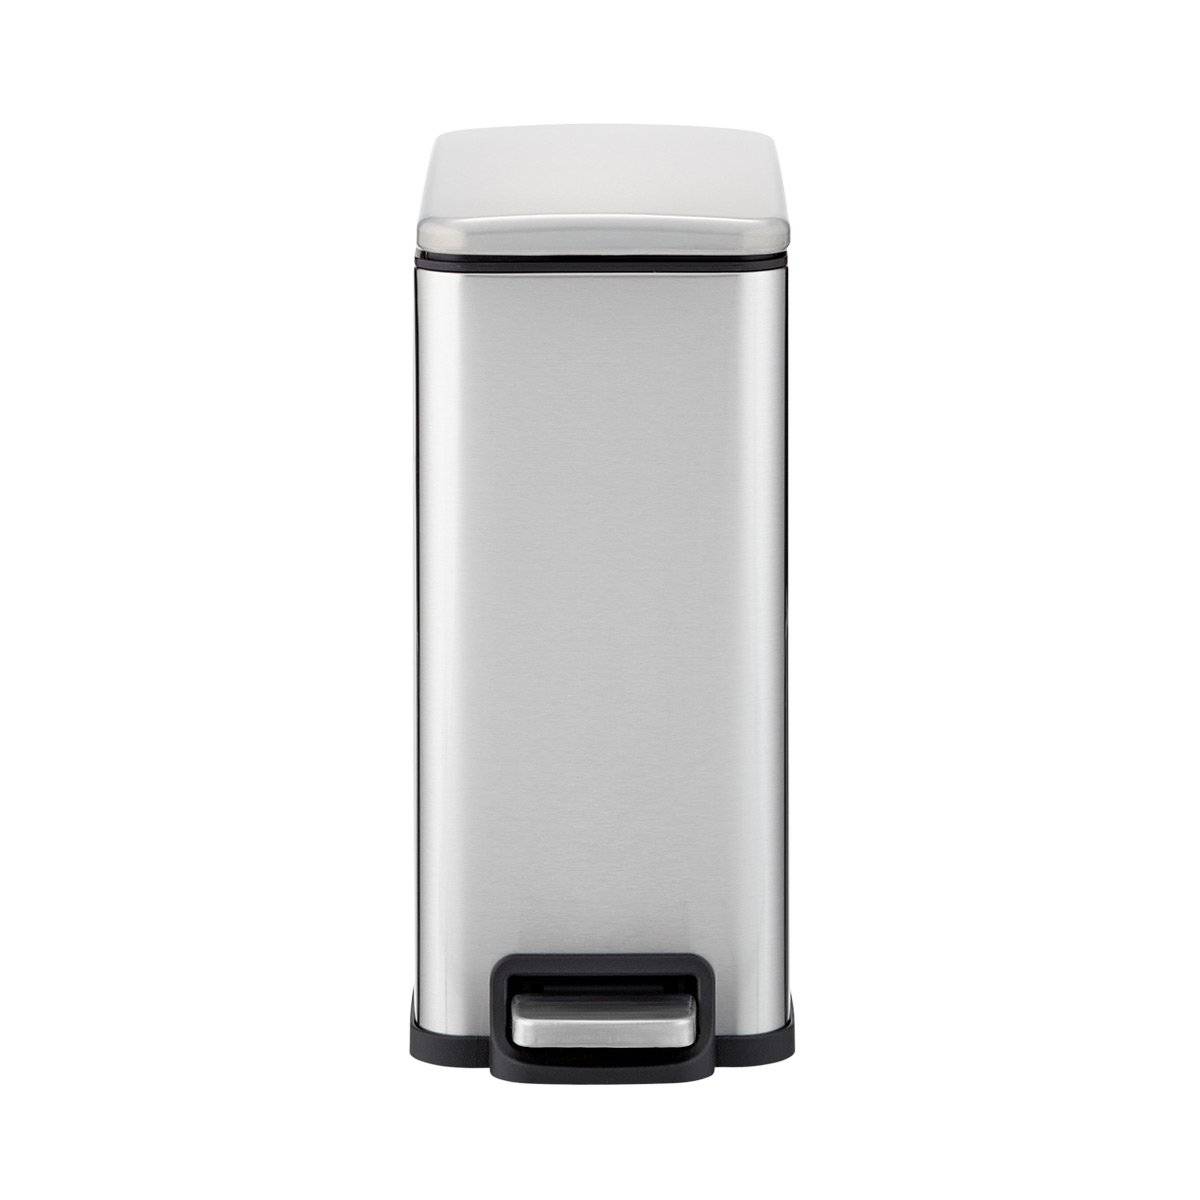 The Container Store 2.6 gal./10L Slim Step Can Stainless Steel